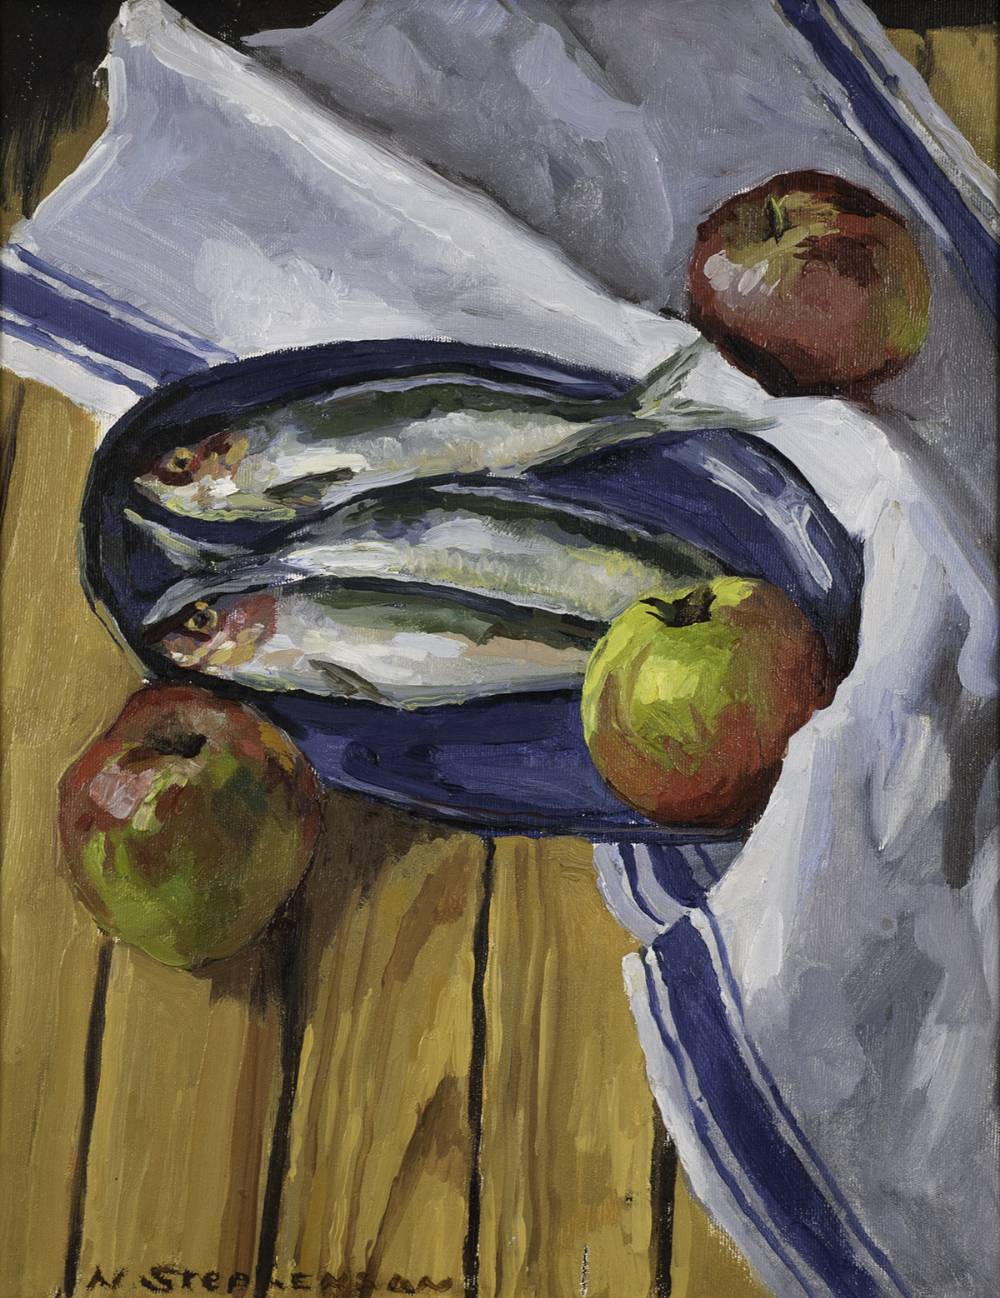 FRUIT OF THE SEA by Nuala Stephenson sold for 260 at Whyte's Auctions